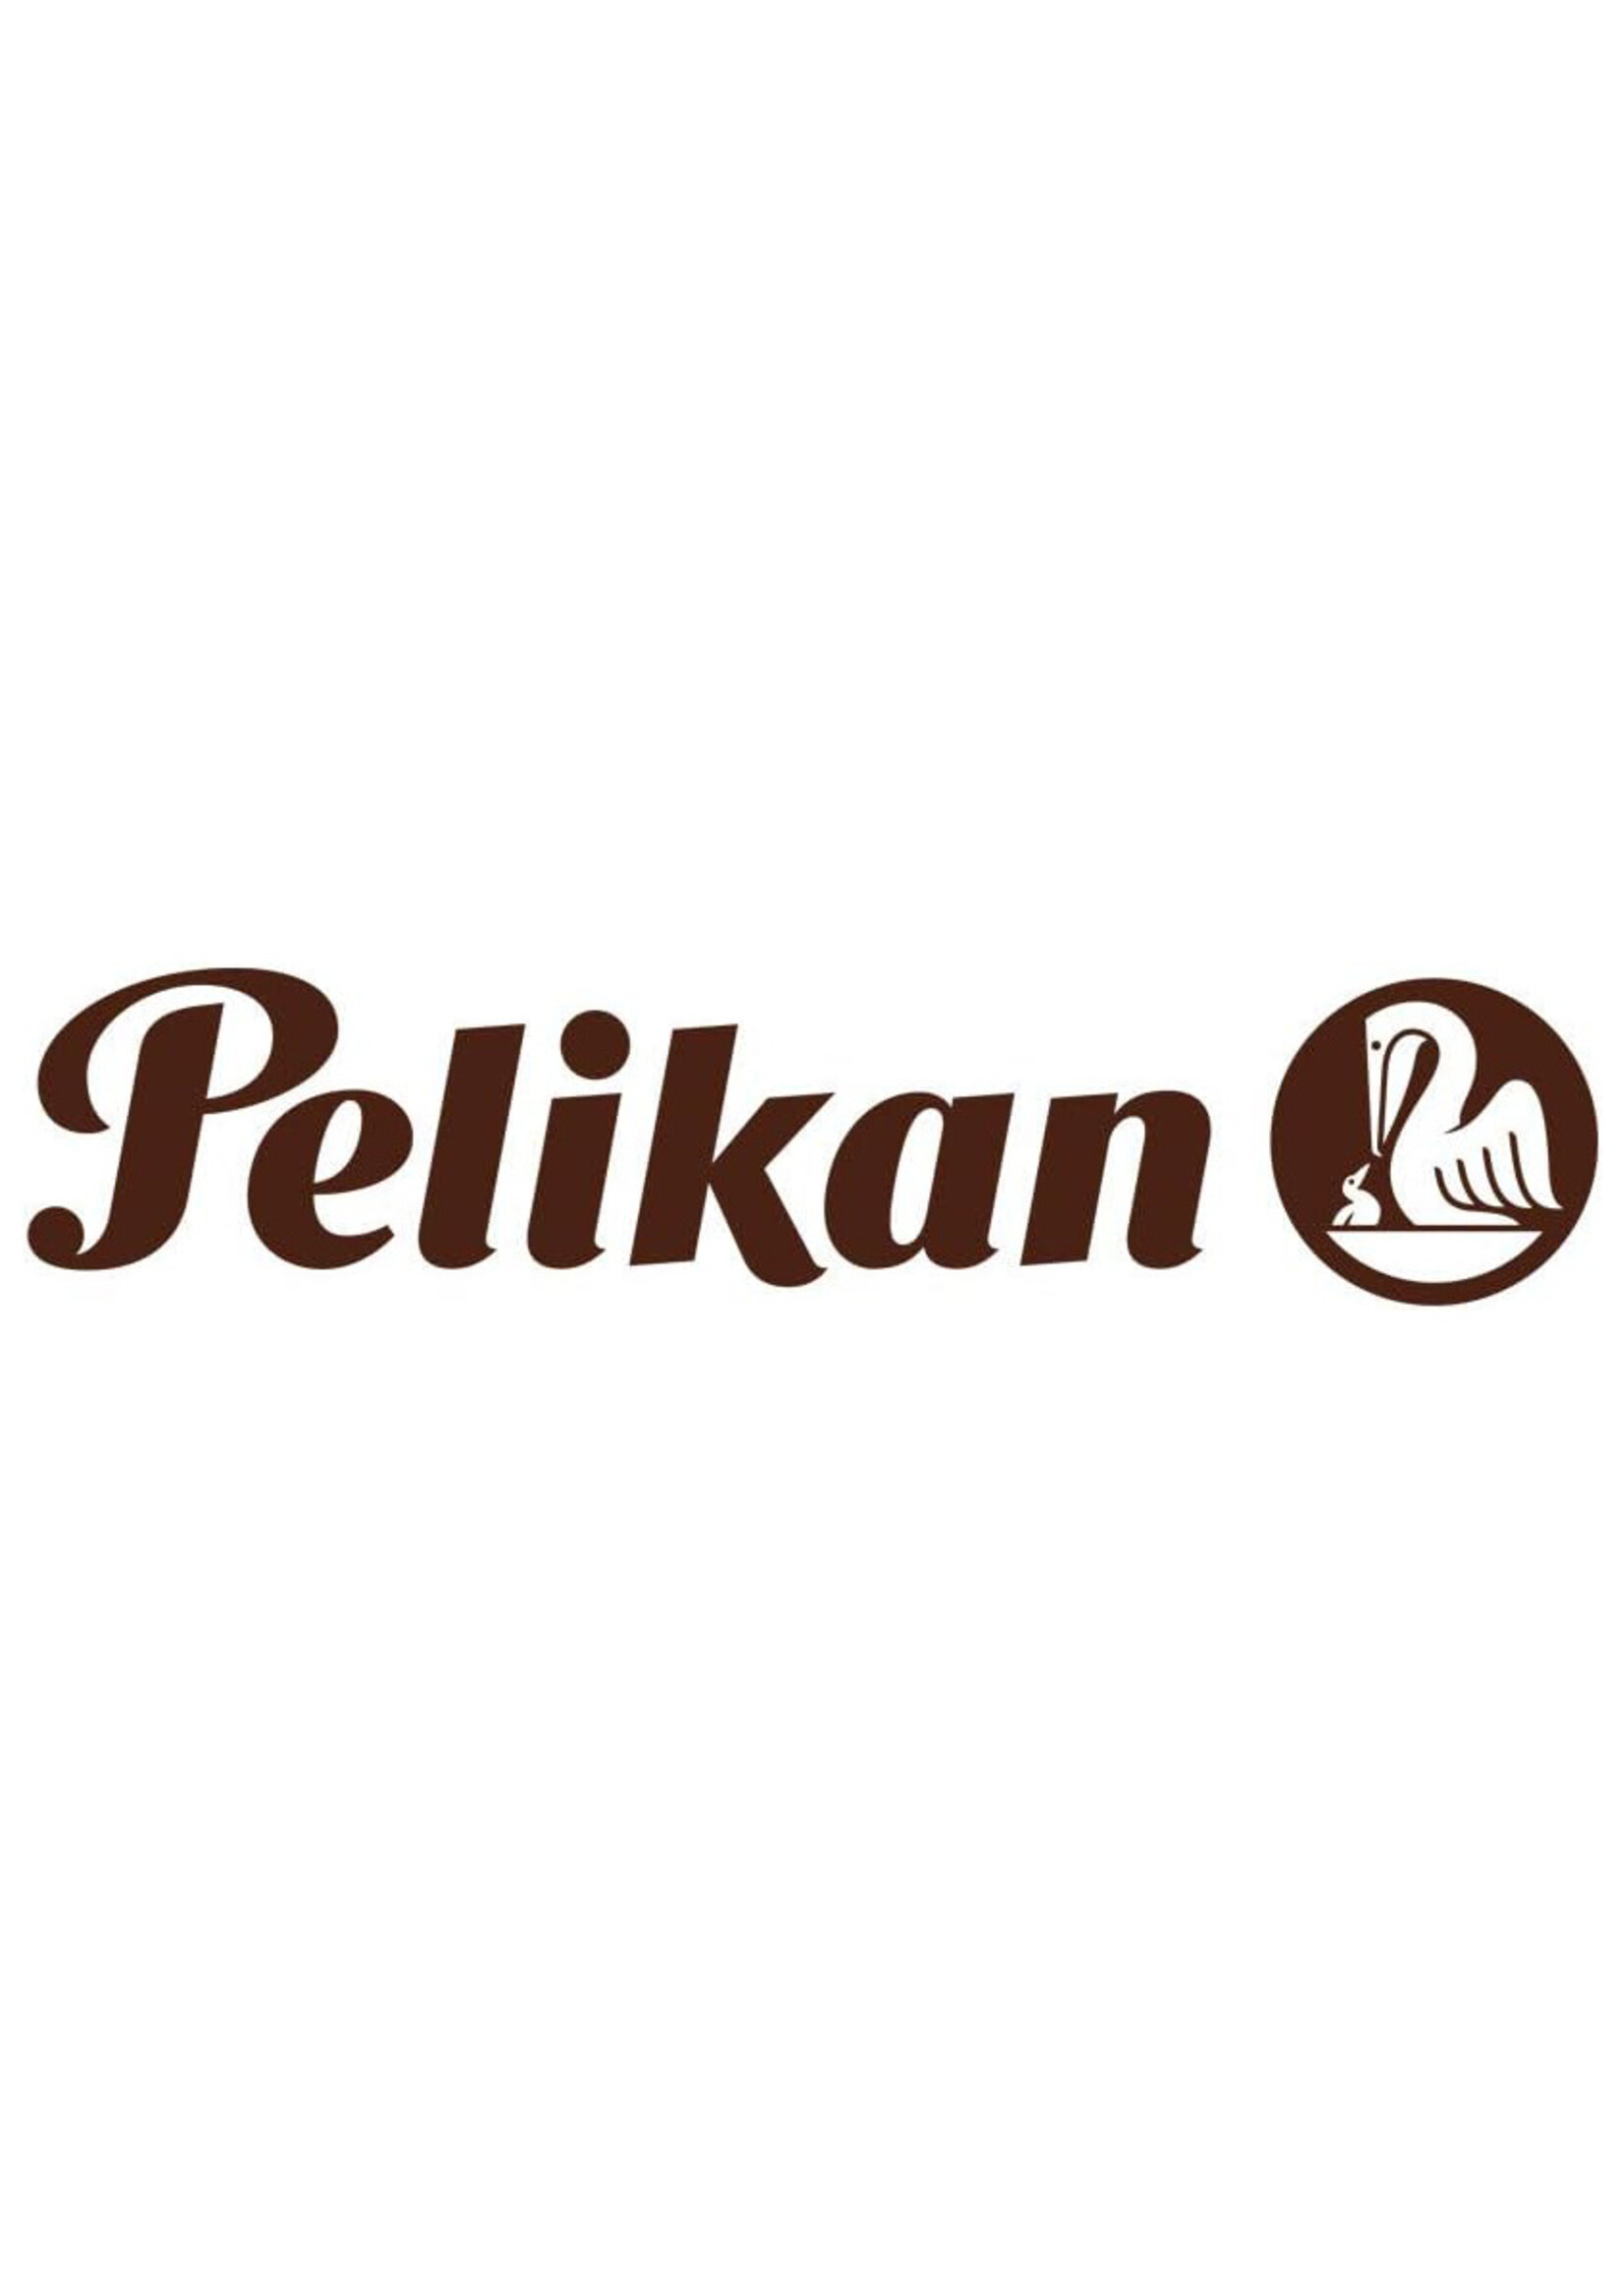 Pelikan Edelstein® Ink Collection Ink of the year 2022 – Apatite